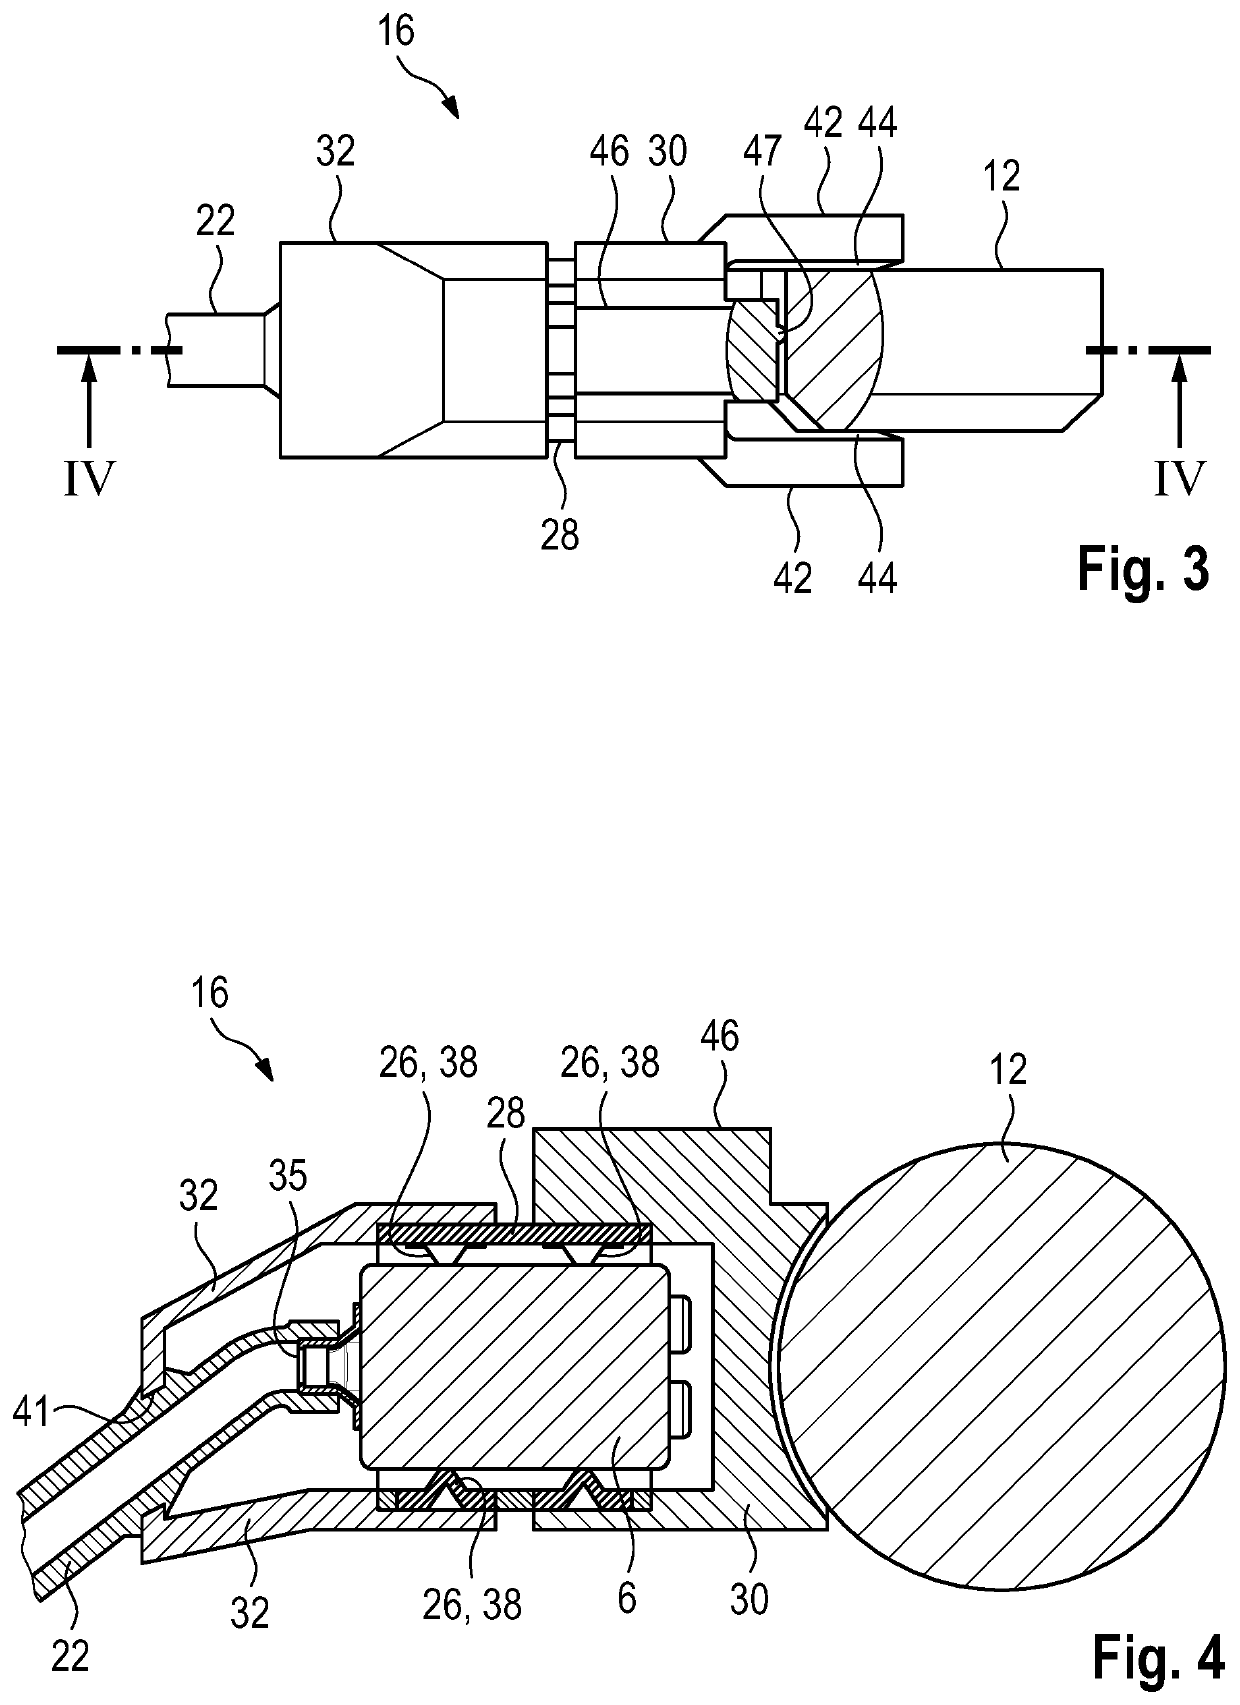 Hearing instrument having a coupling unit for the vibration-damped mounting of a receiver